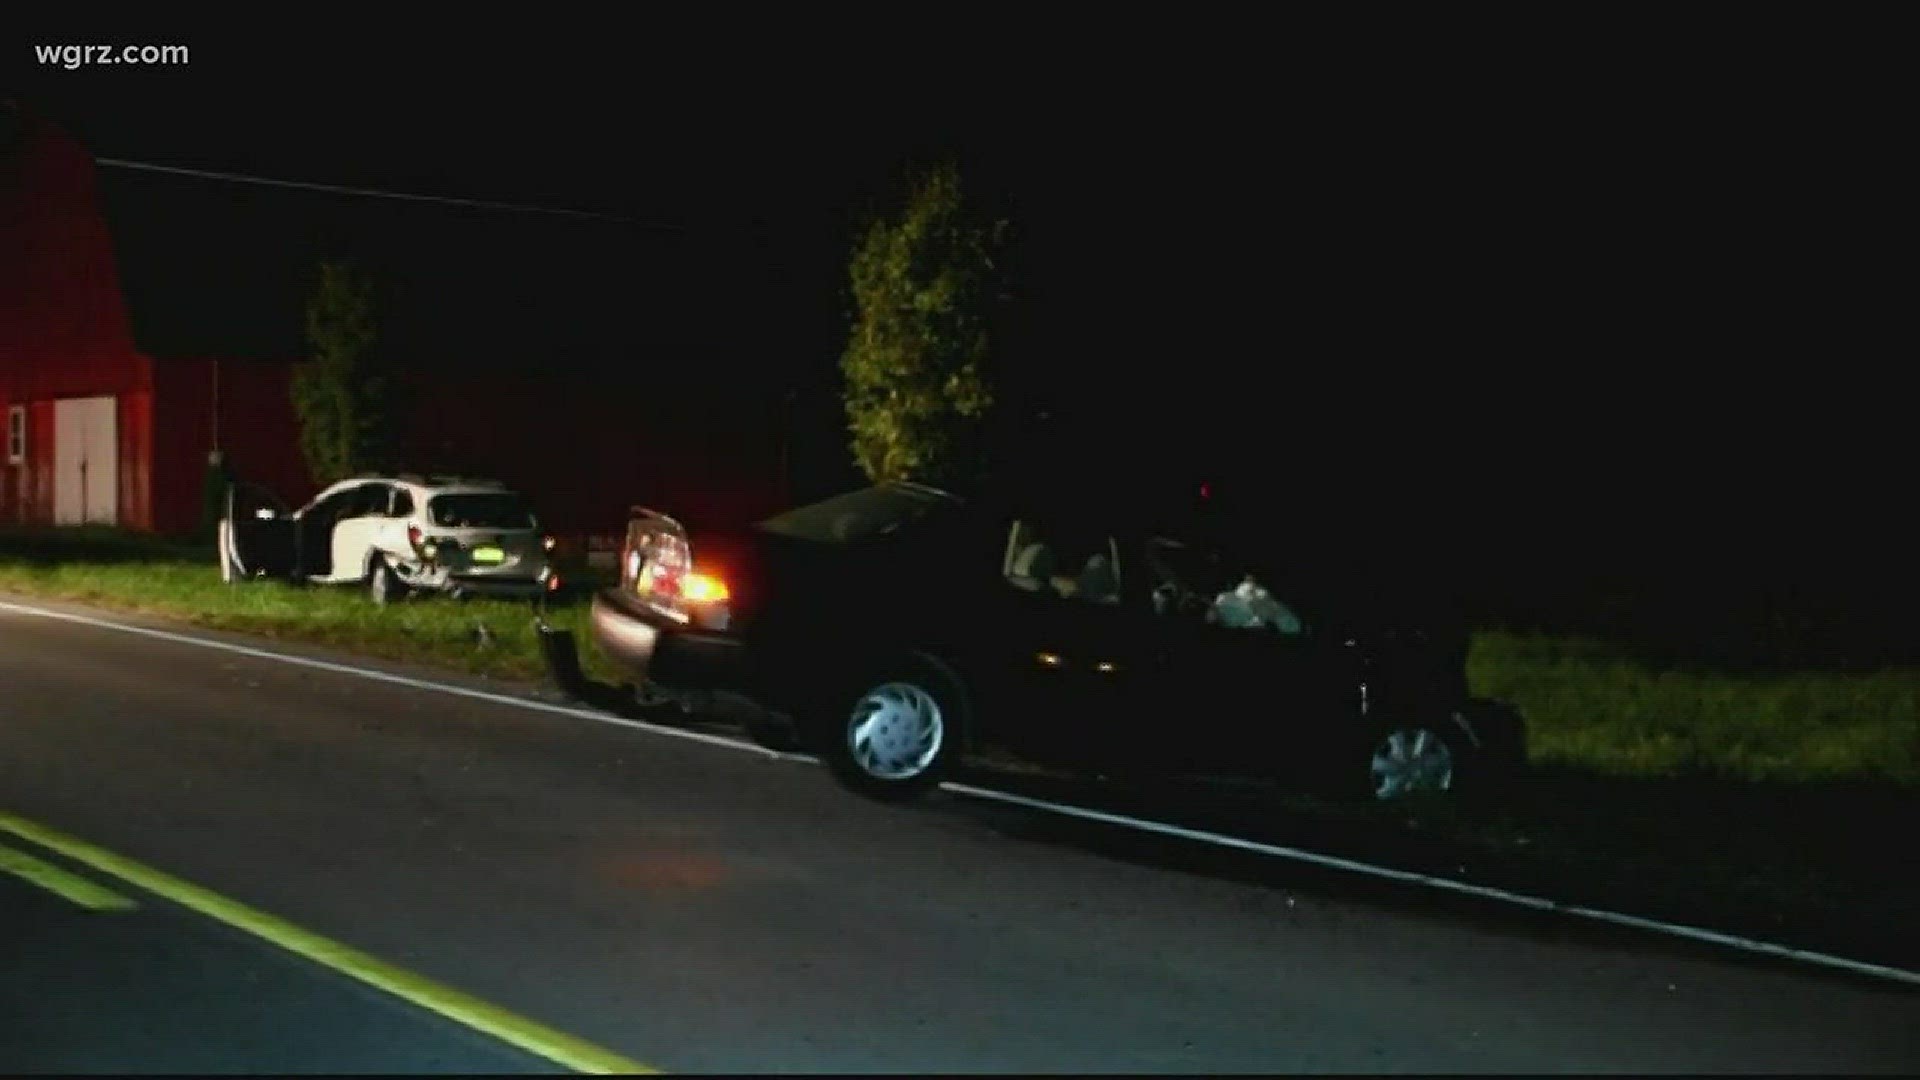 One person has died after a crash in Lockport. Police say one person has been charged with DWI.